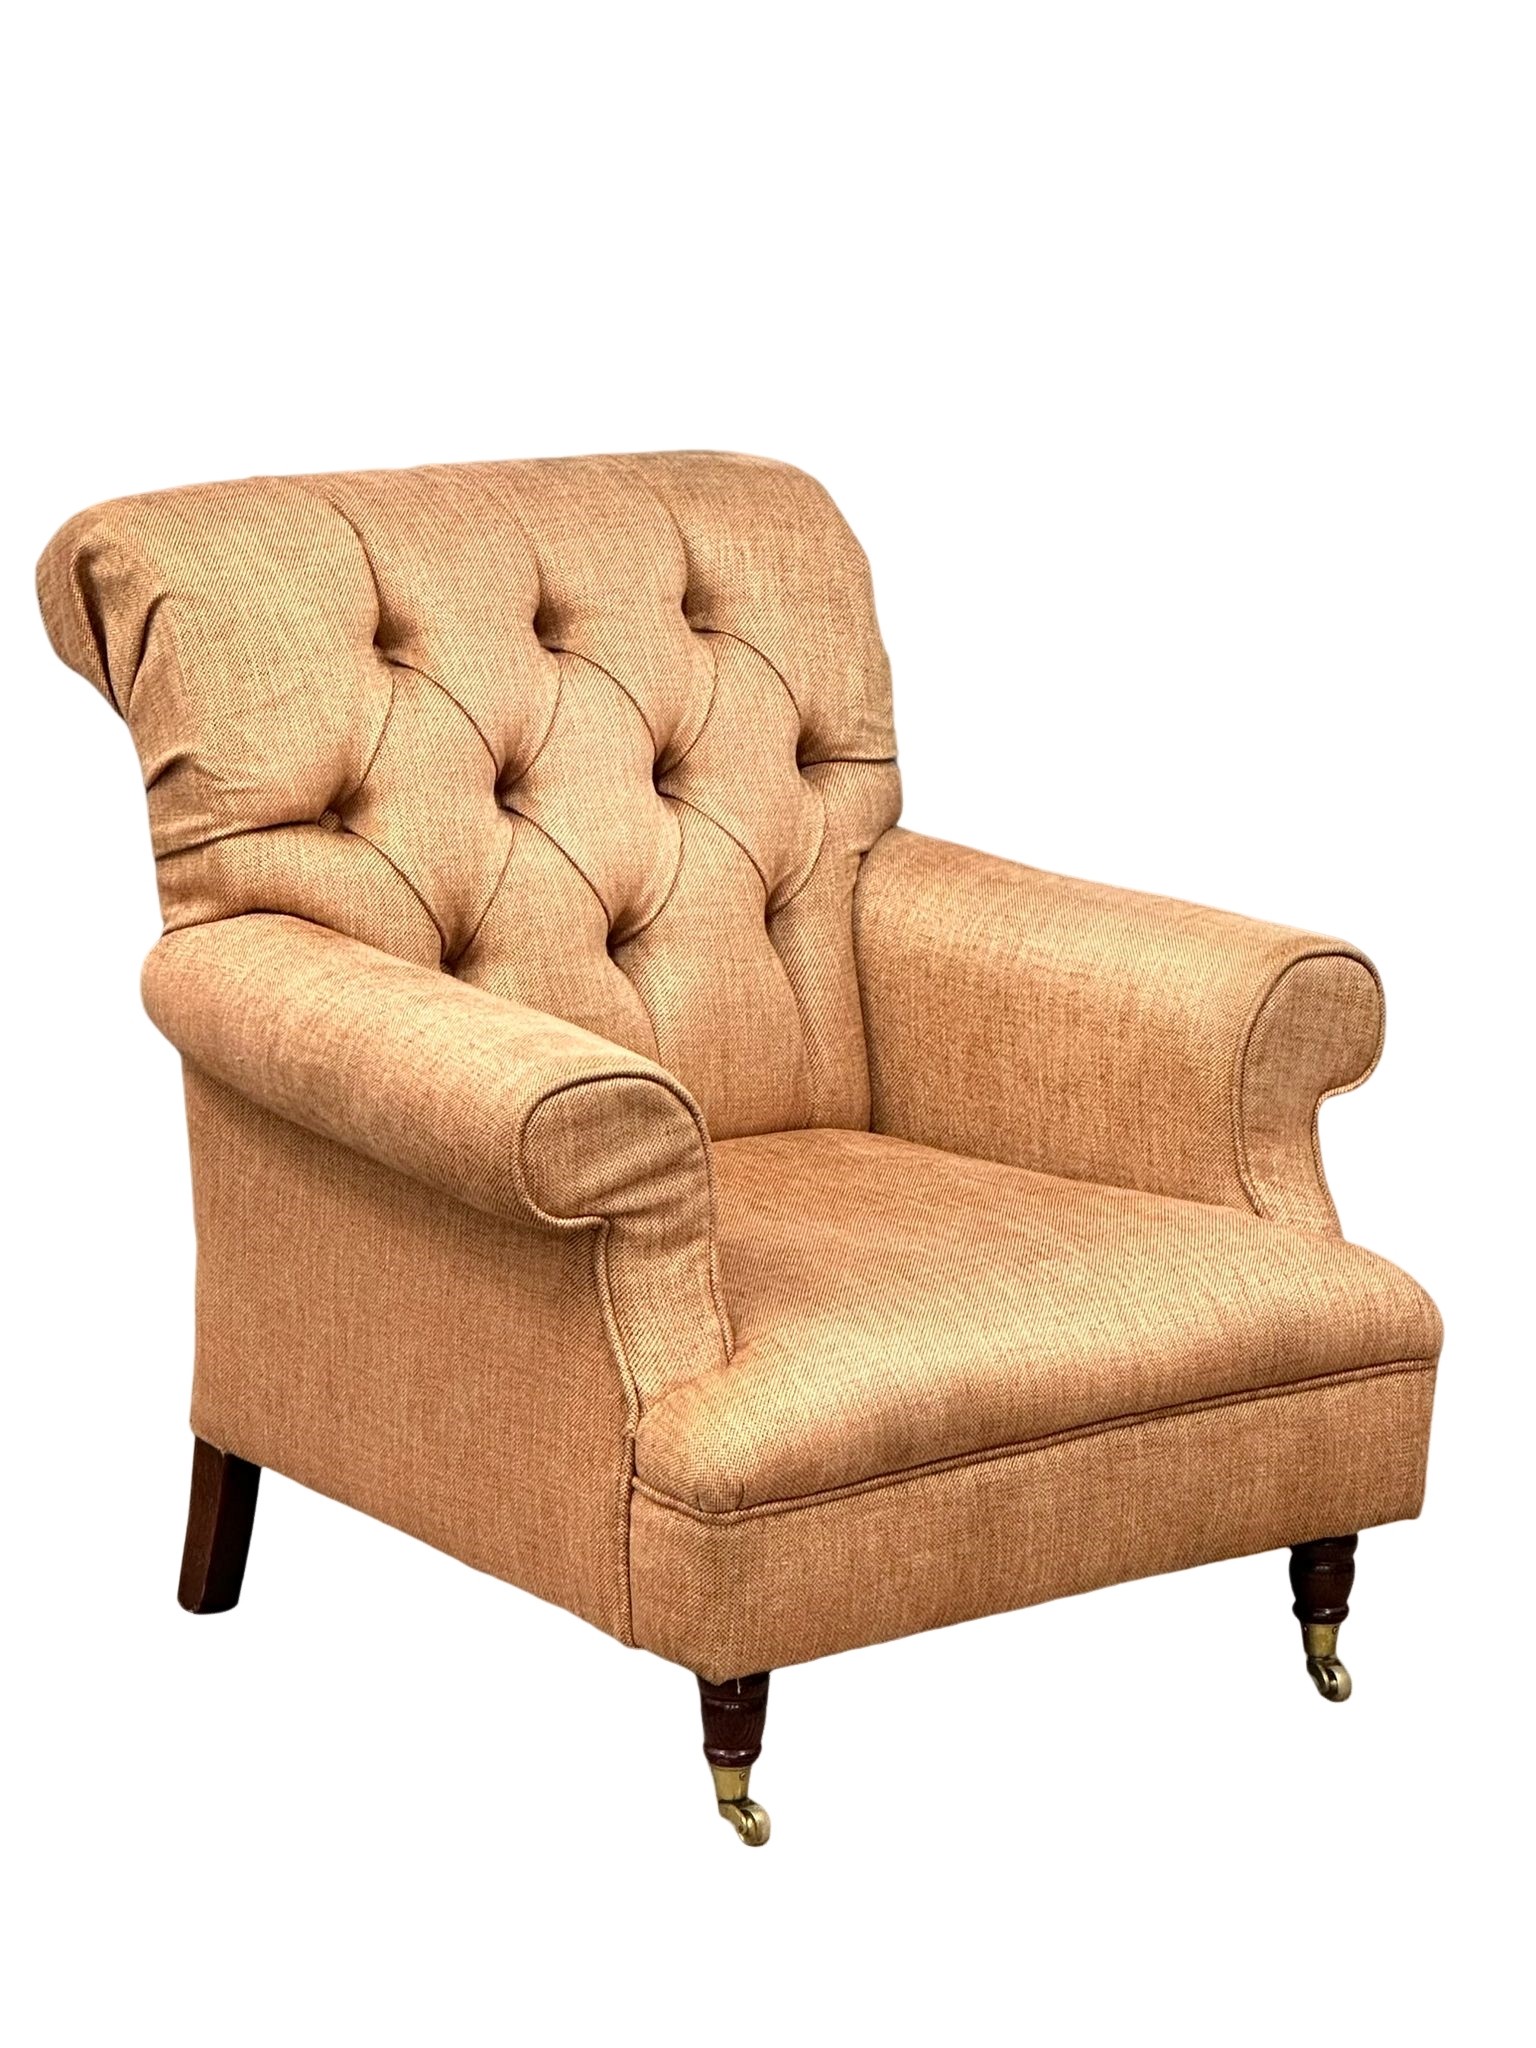 A Late Victorian style button back armchair on brass cup casters. 86x85x90cm - Image 5 of 5